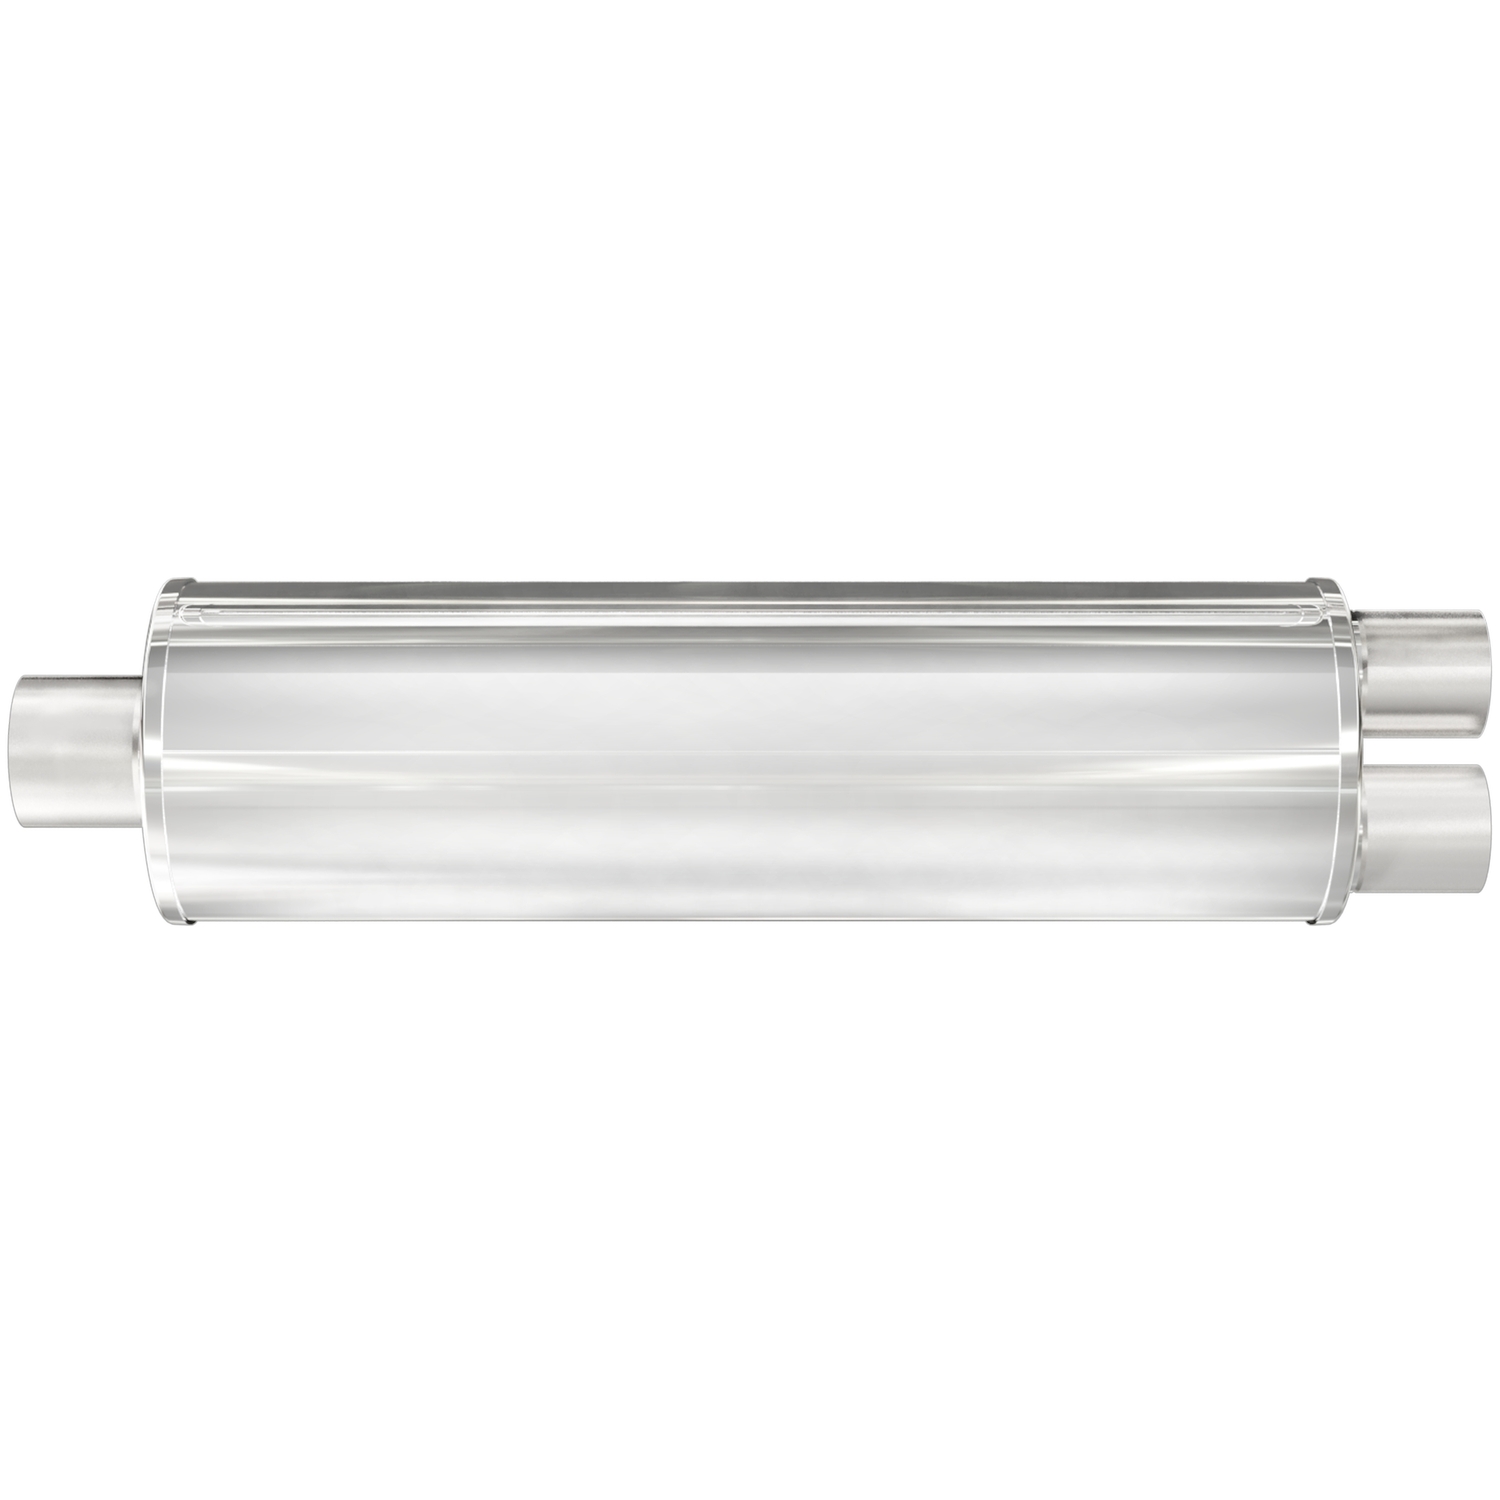 7" Round XL 3-Chamber Muffler Single In/Dual Out: 3"/2.5" Body Length: 24" Overall Length: 30" Satin Finish